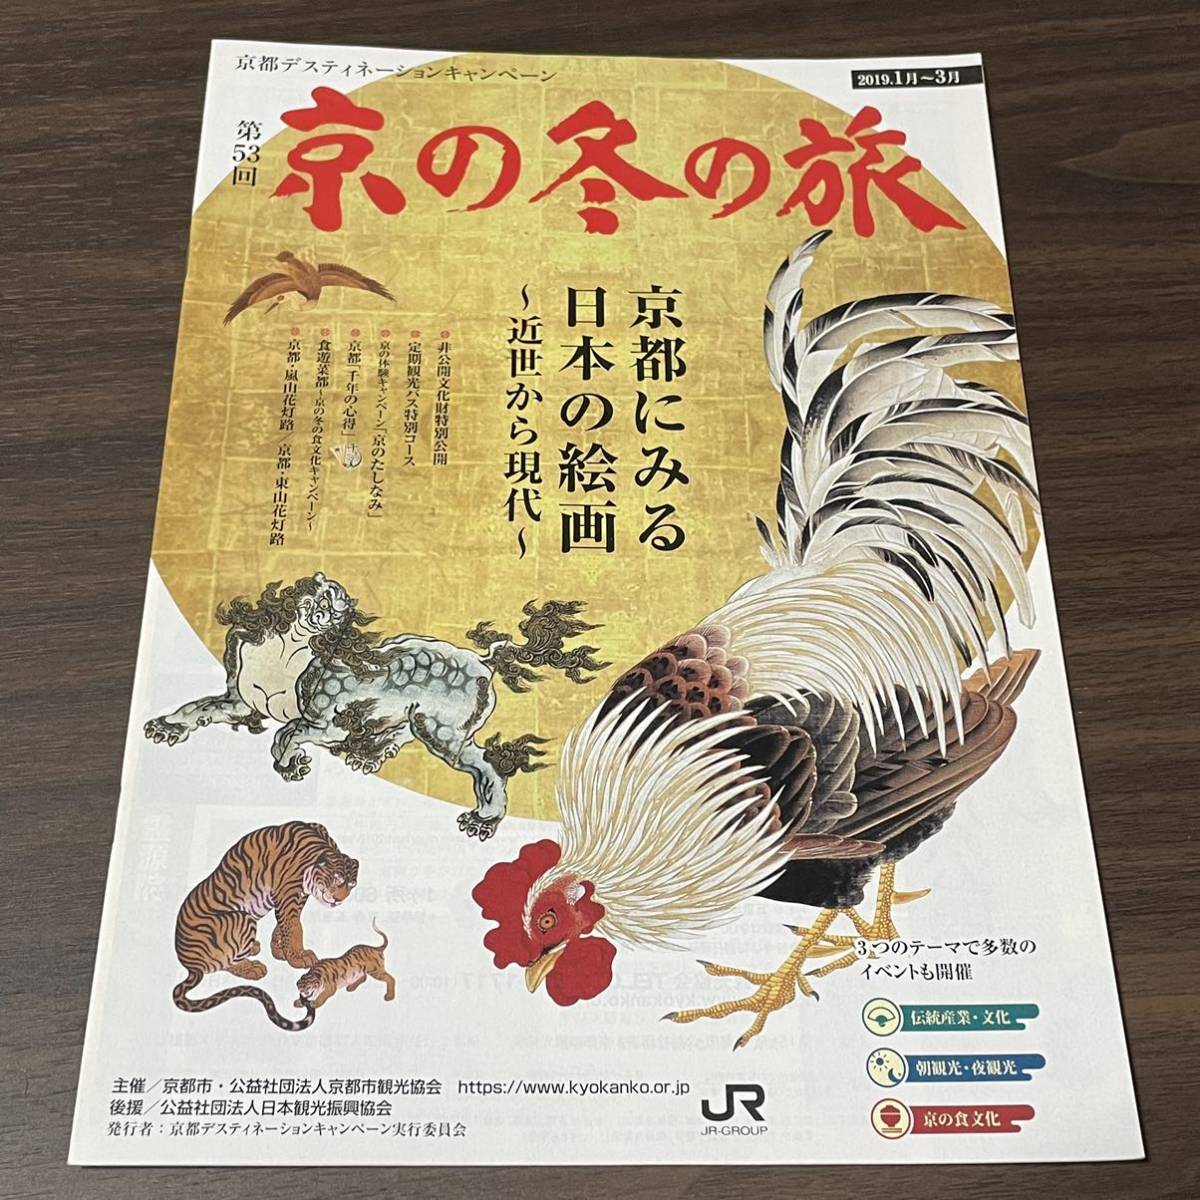 [53rd Winter Trip to Kyoto] Special exhibition of non-public cultural properties Tourist guide Pamphlet Japanese paintings in Kyoto ~From early modern times to modern times~ 2019, trip, leisure guide, travel guide, Domestic guide